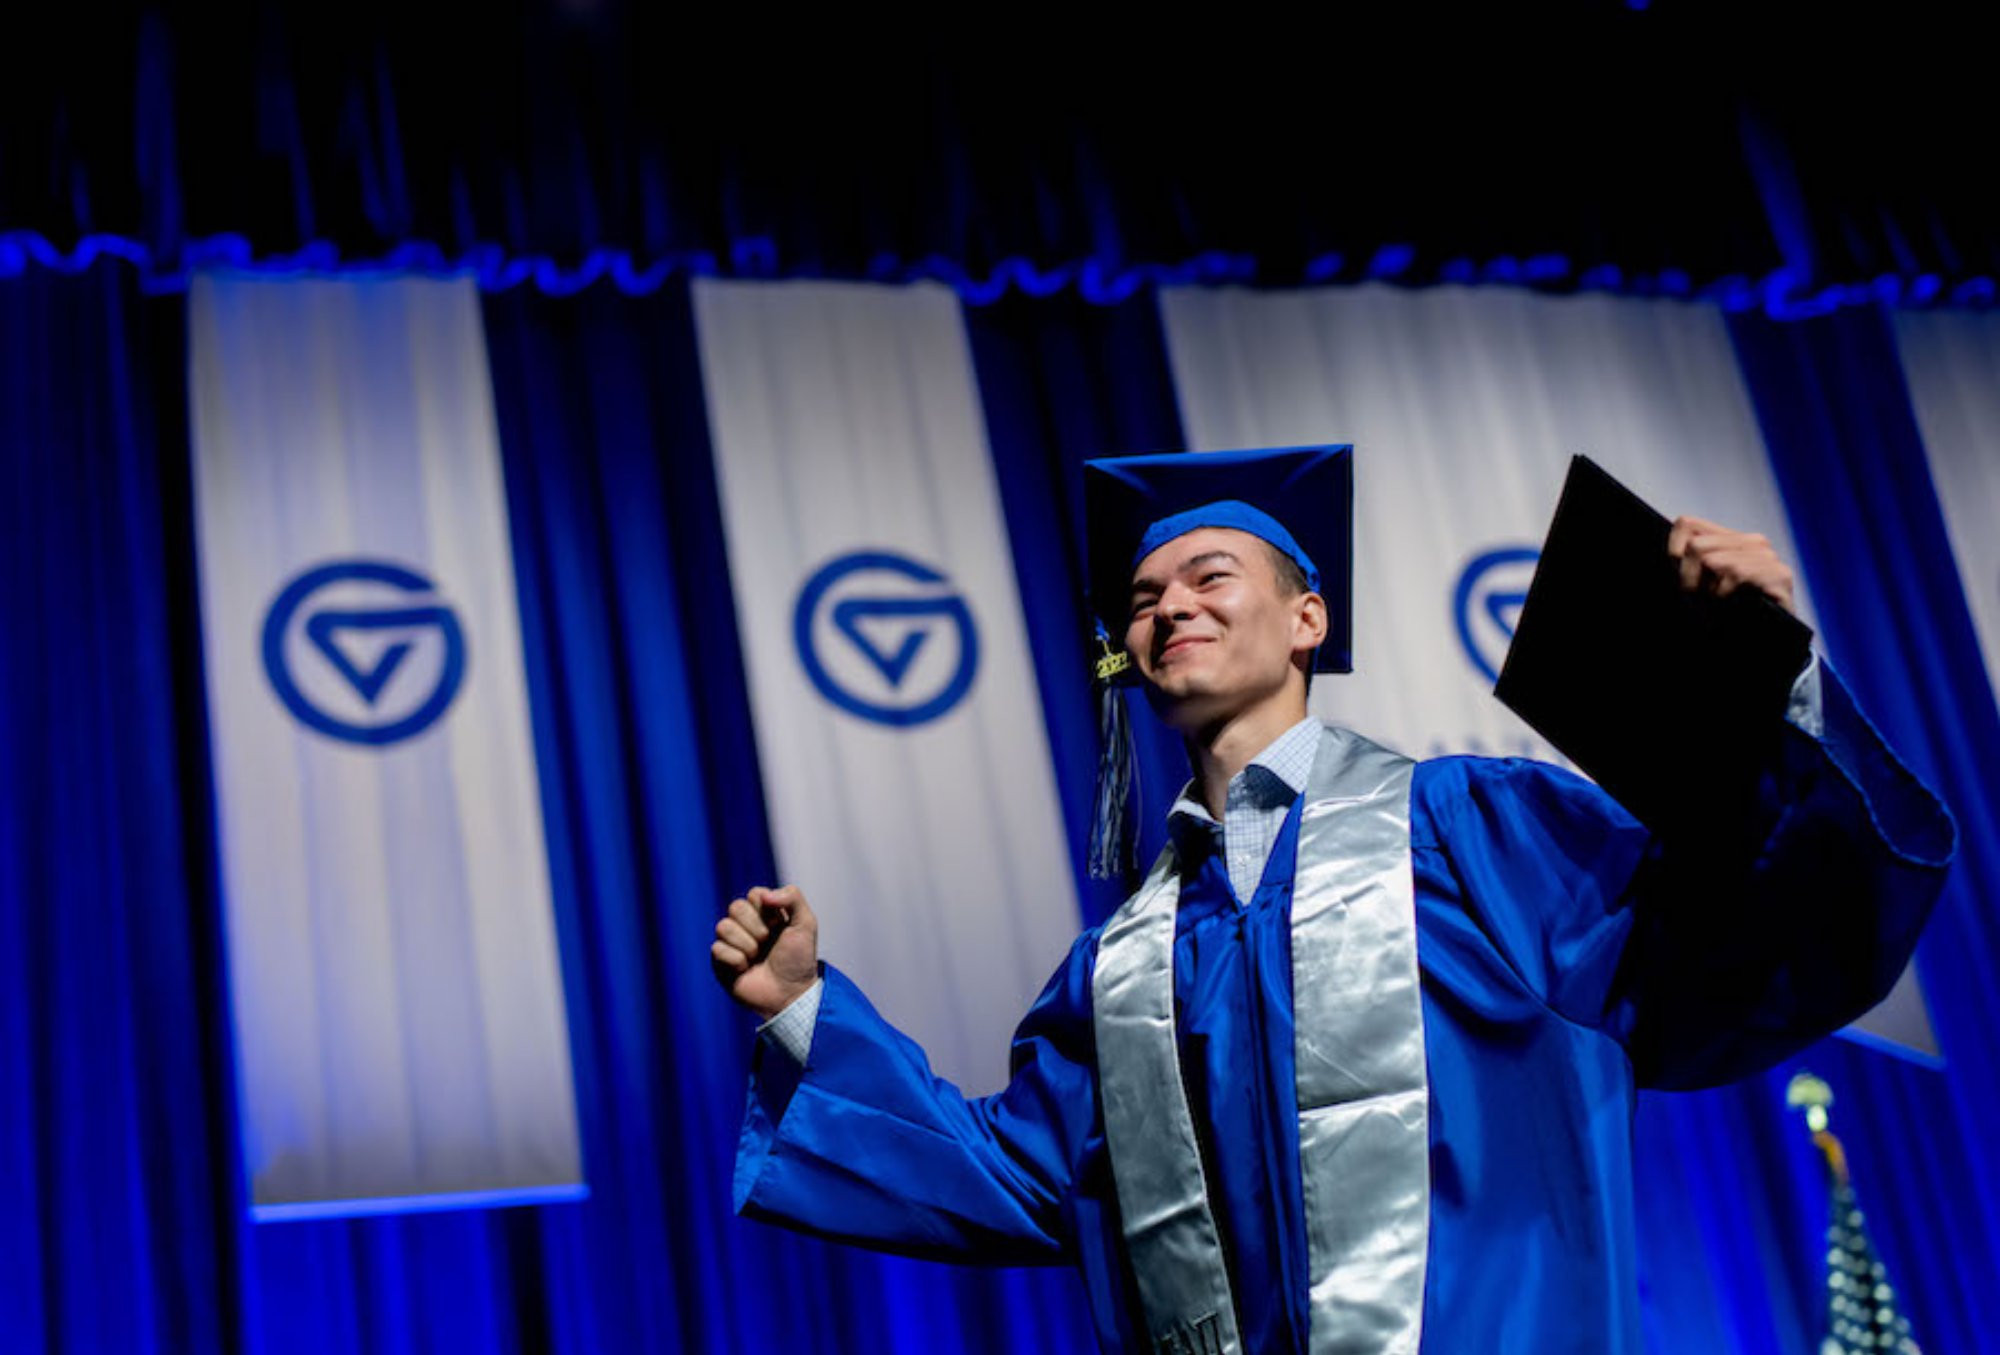 Student cheering and accepting his diploma on stage at graduation